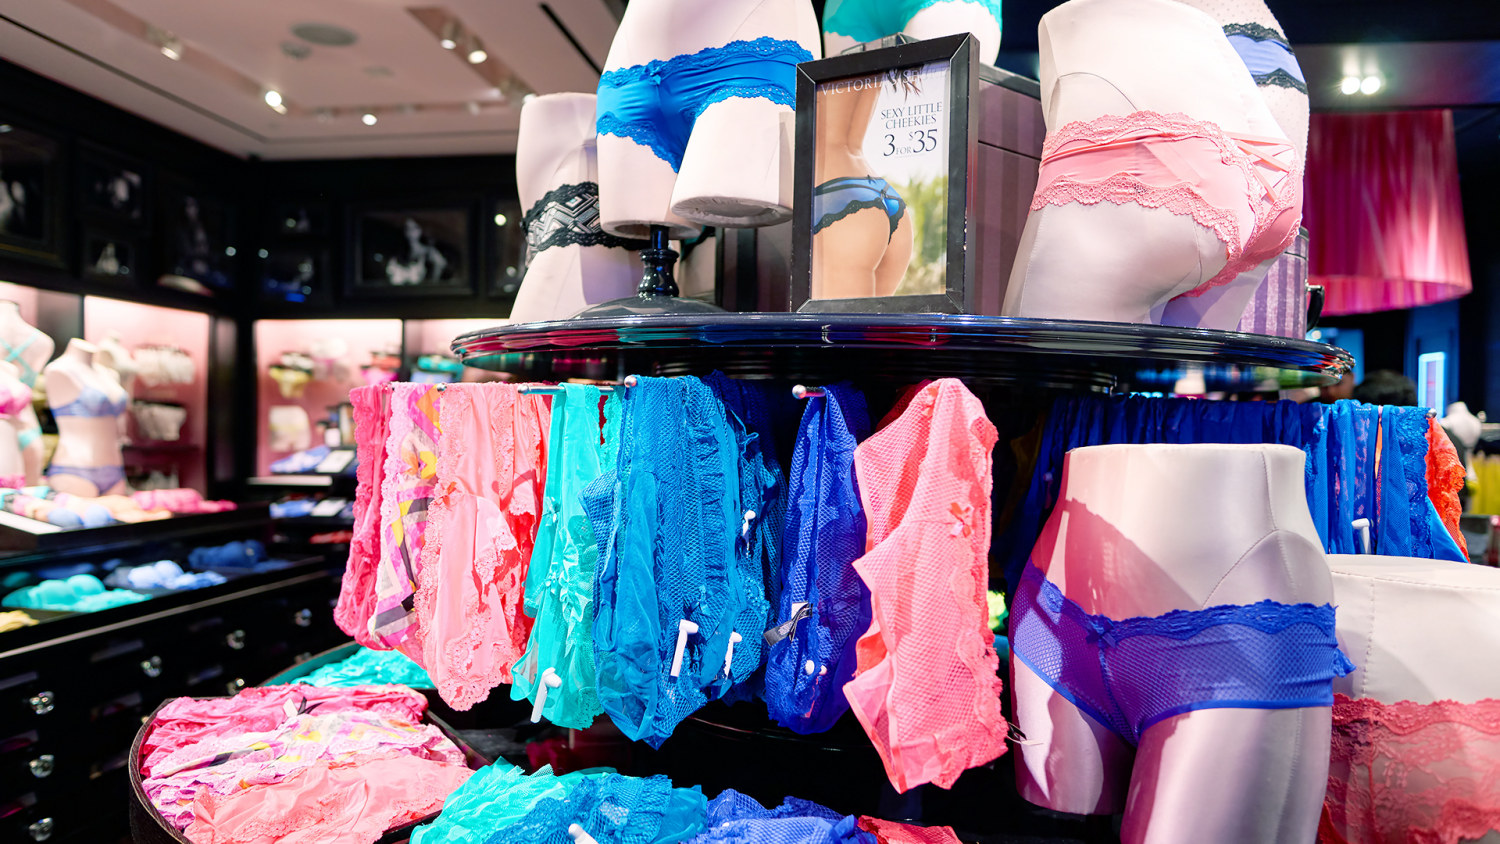 Victoria's Secret 'free panty' coupons will end